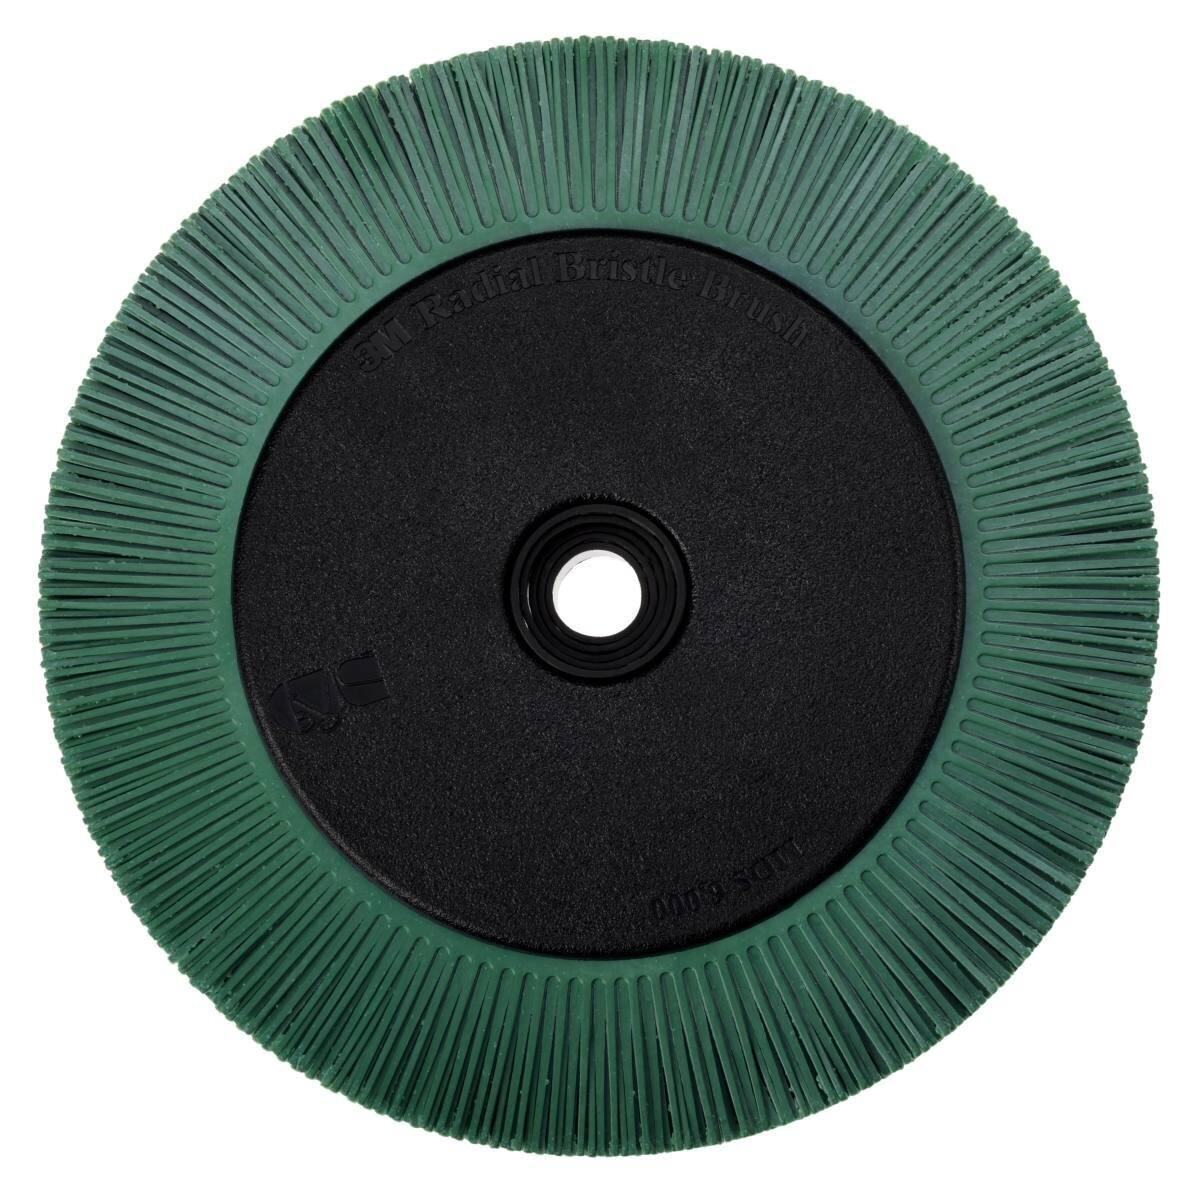 3M Scotch-Brite Radial Bristle Disc BB-ZB with flange, green, 203.2 mm, P50, type S #33081